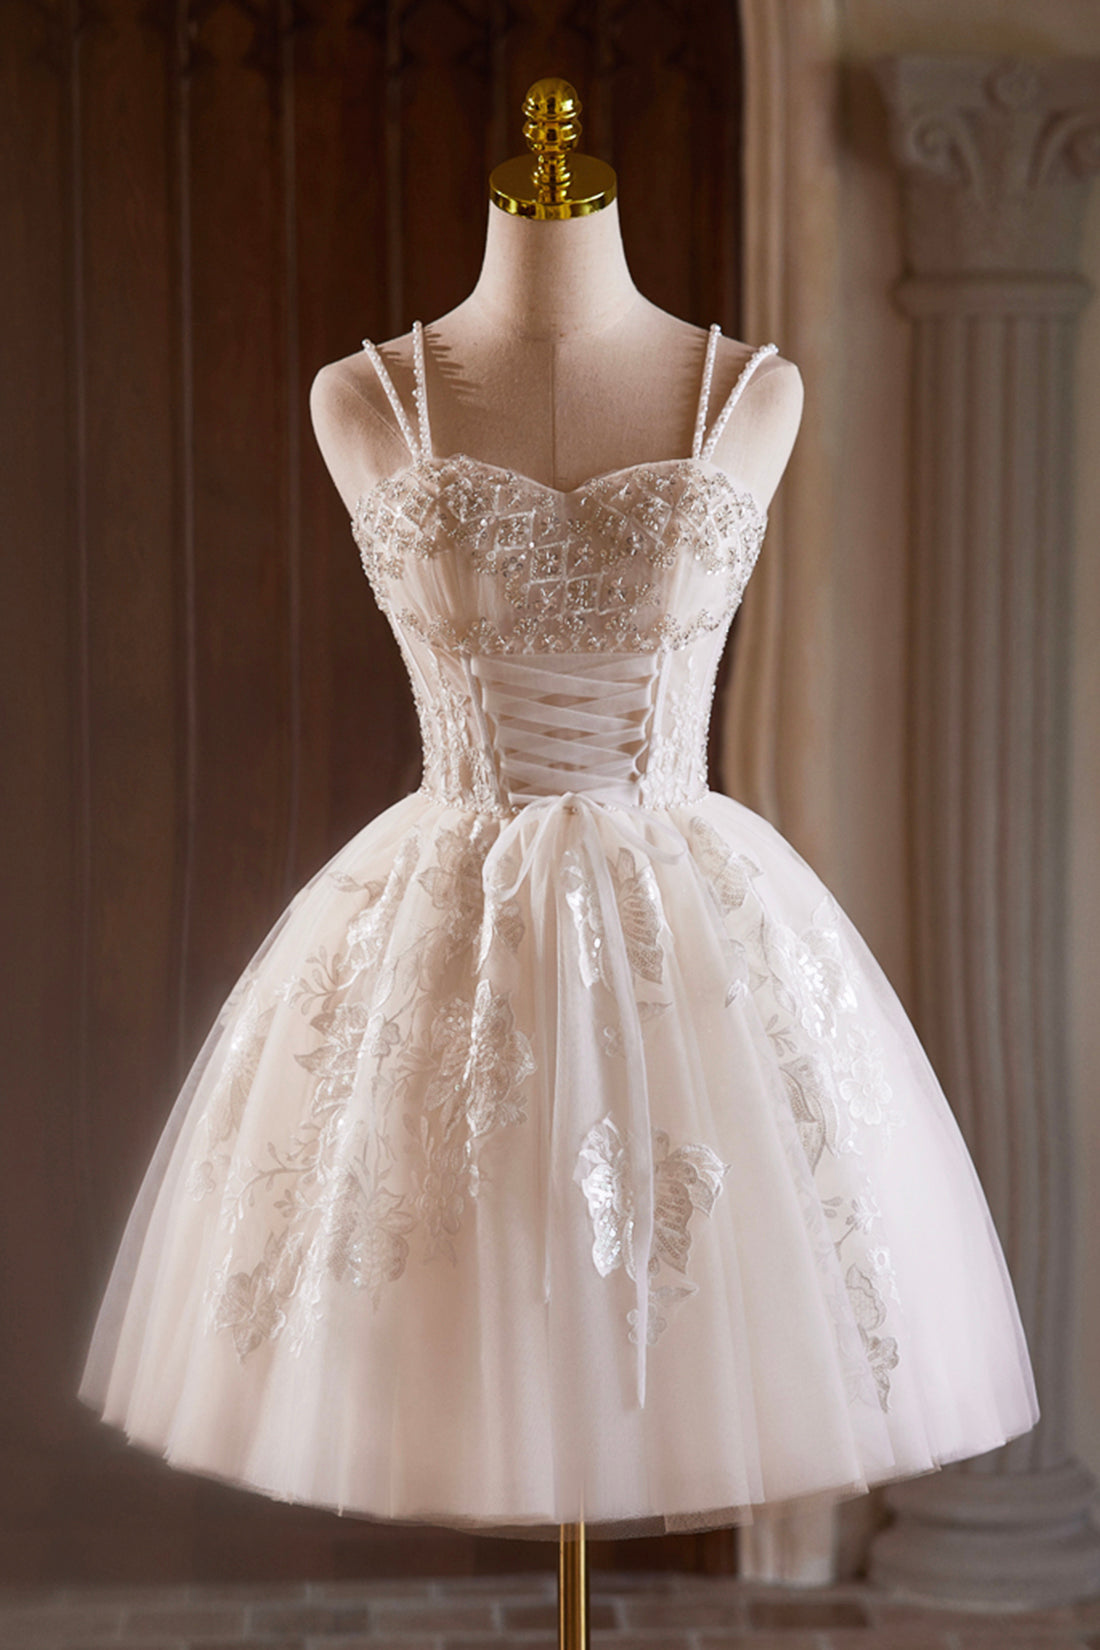 Light Champagne Spaghetti Strap Tulle Beaded Short Prom Dress, Beautiful A-Line Evening Party Dress